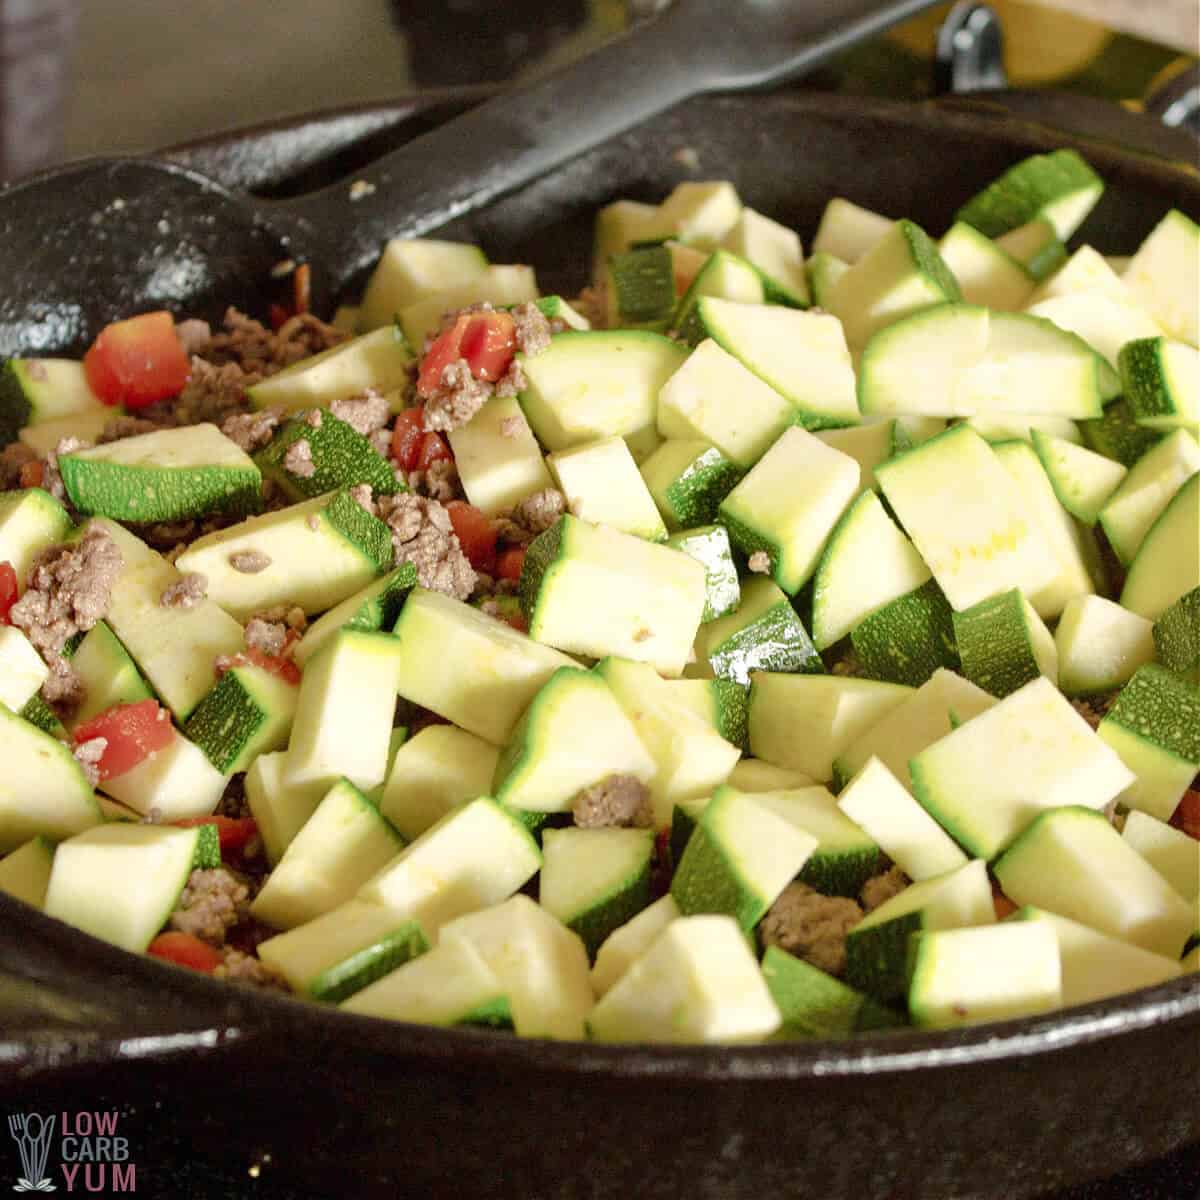 zucchini added to skillet